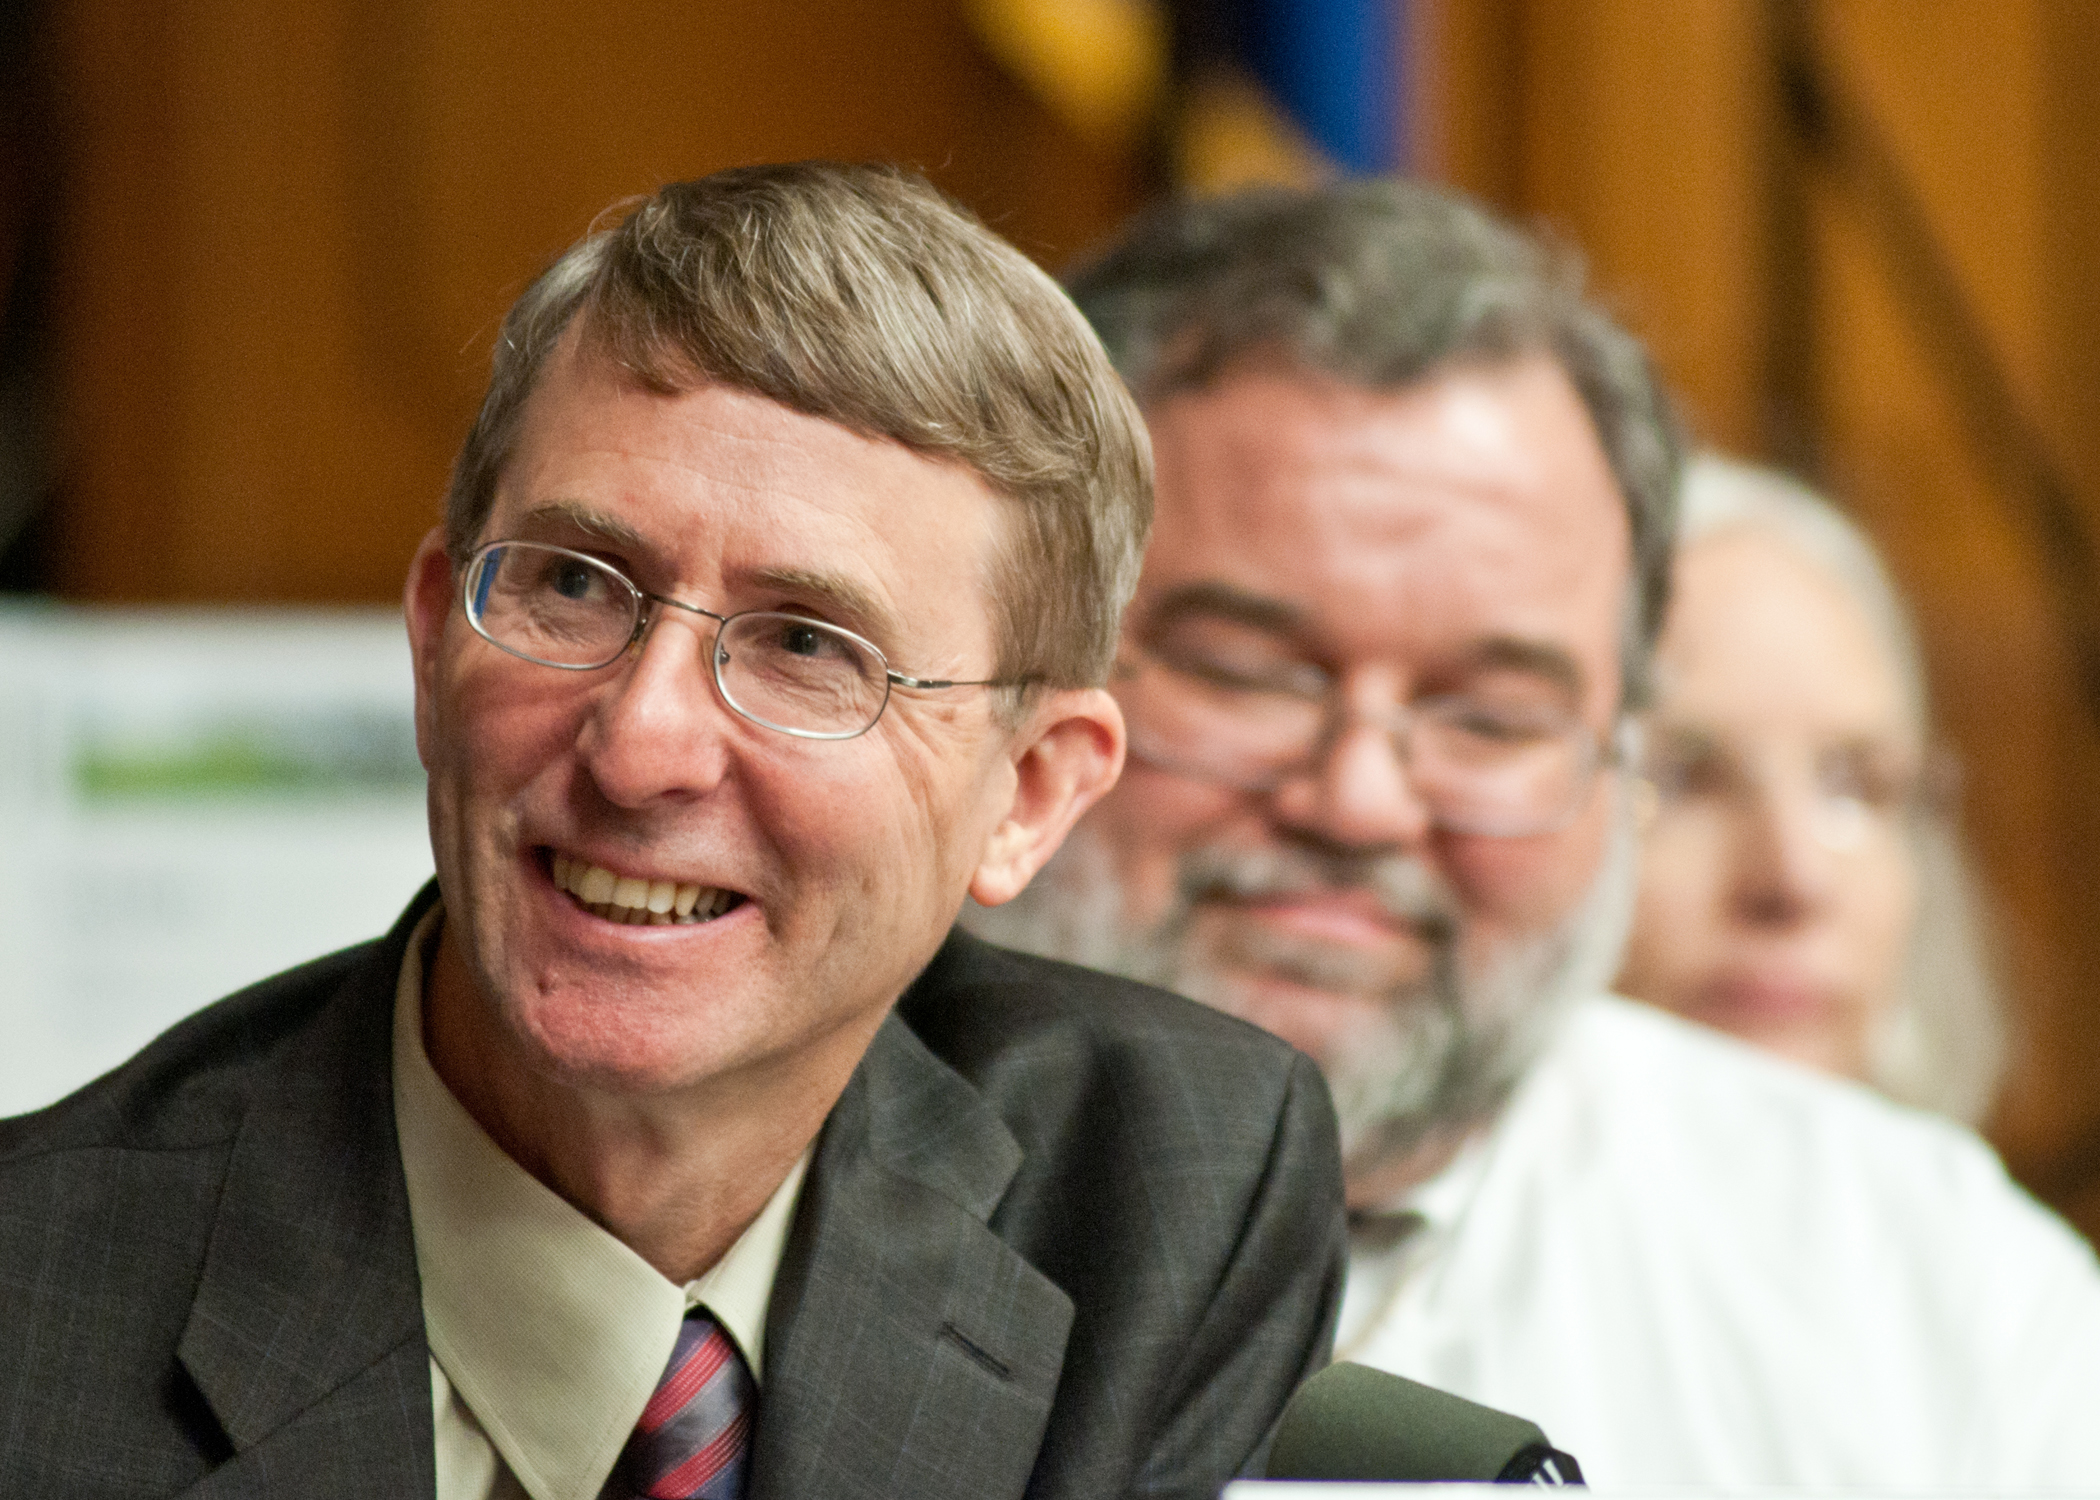 an older man in a gray suit smiling while two others watch